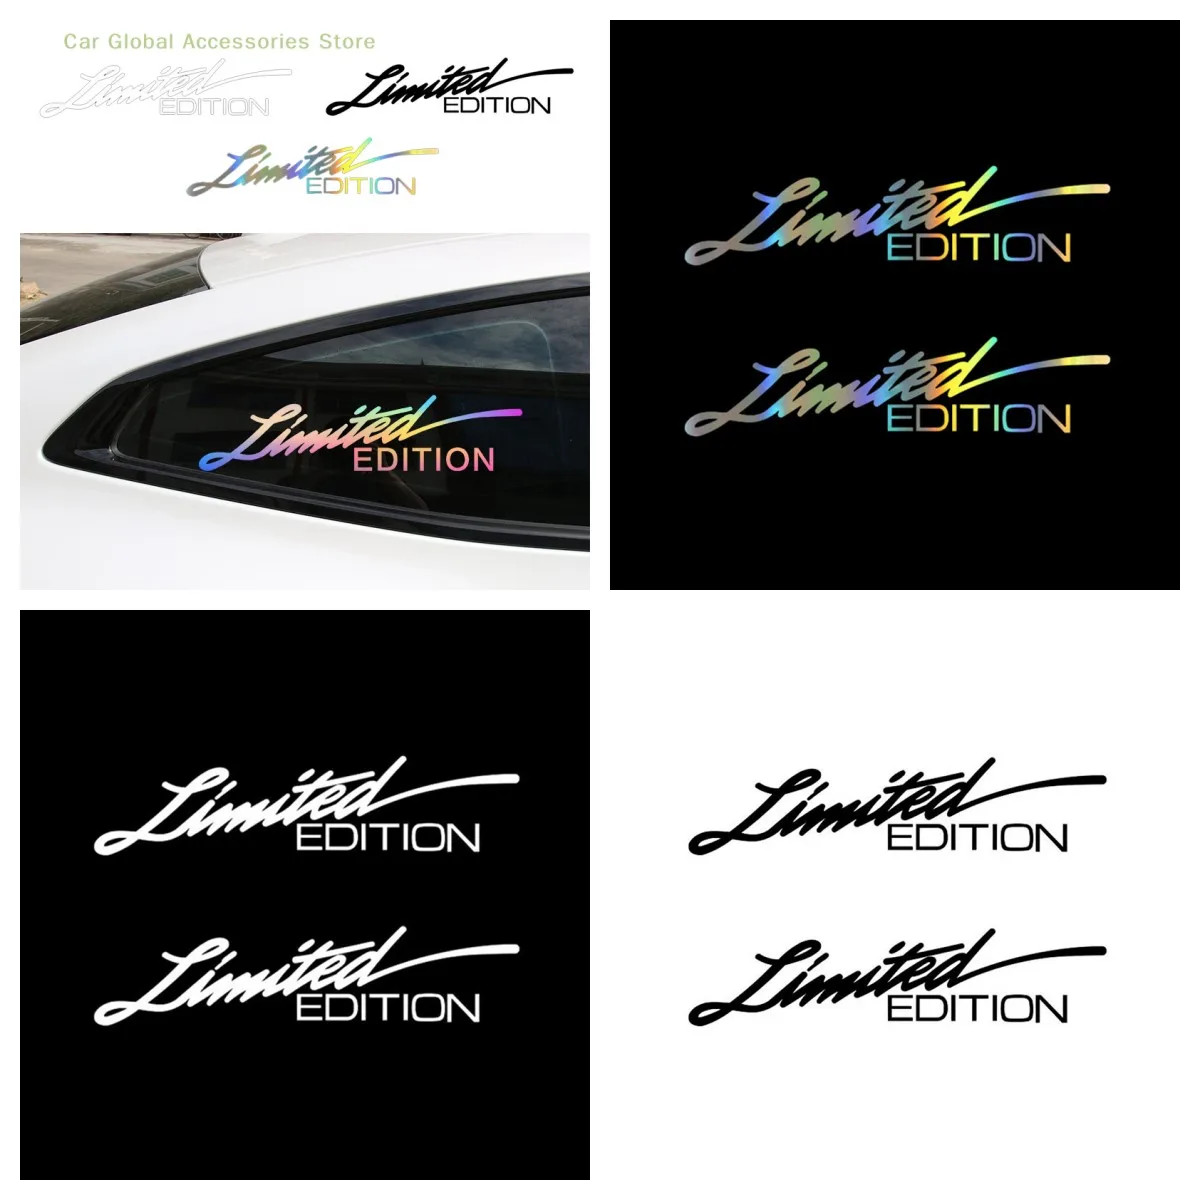 Limited Edition Car Stickers Waterproof Vinyl Decal Car Styling Decoration  Accessories Auto Sticker